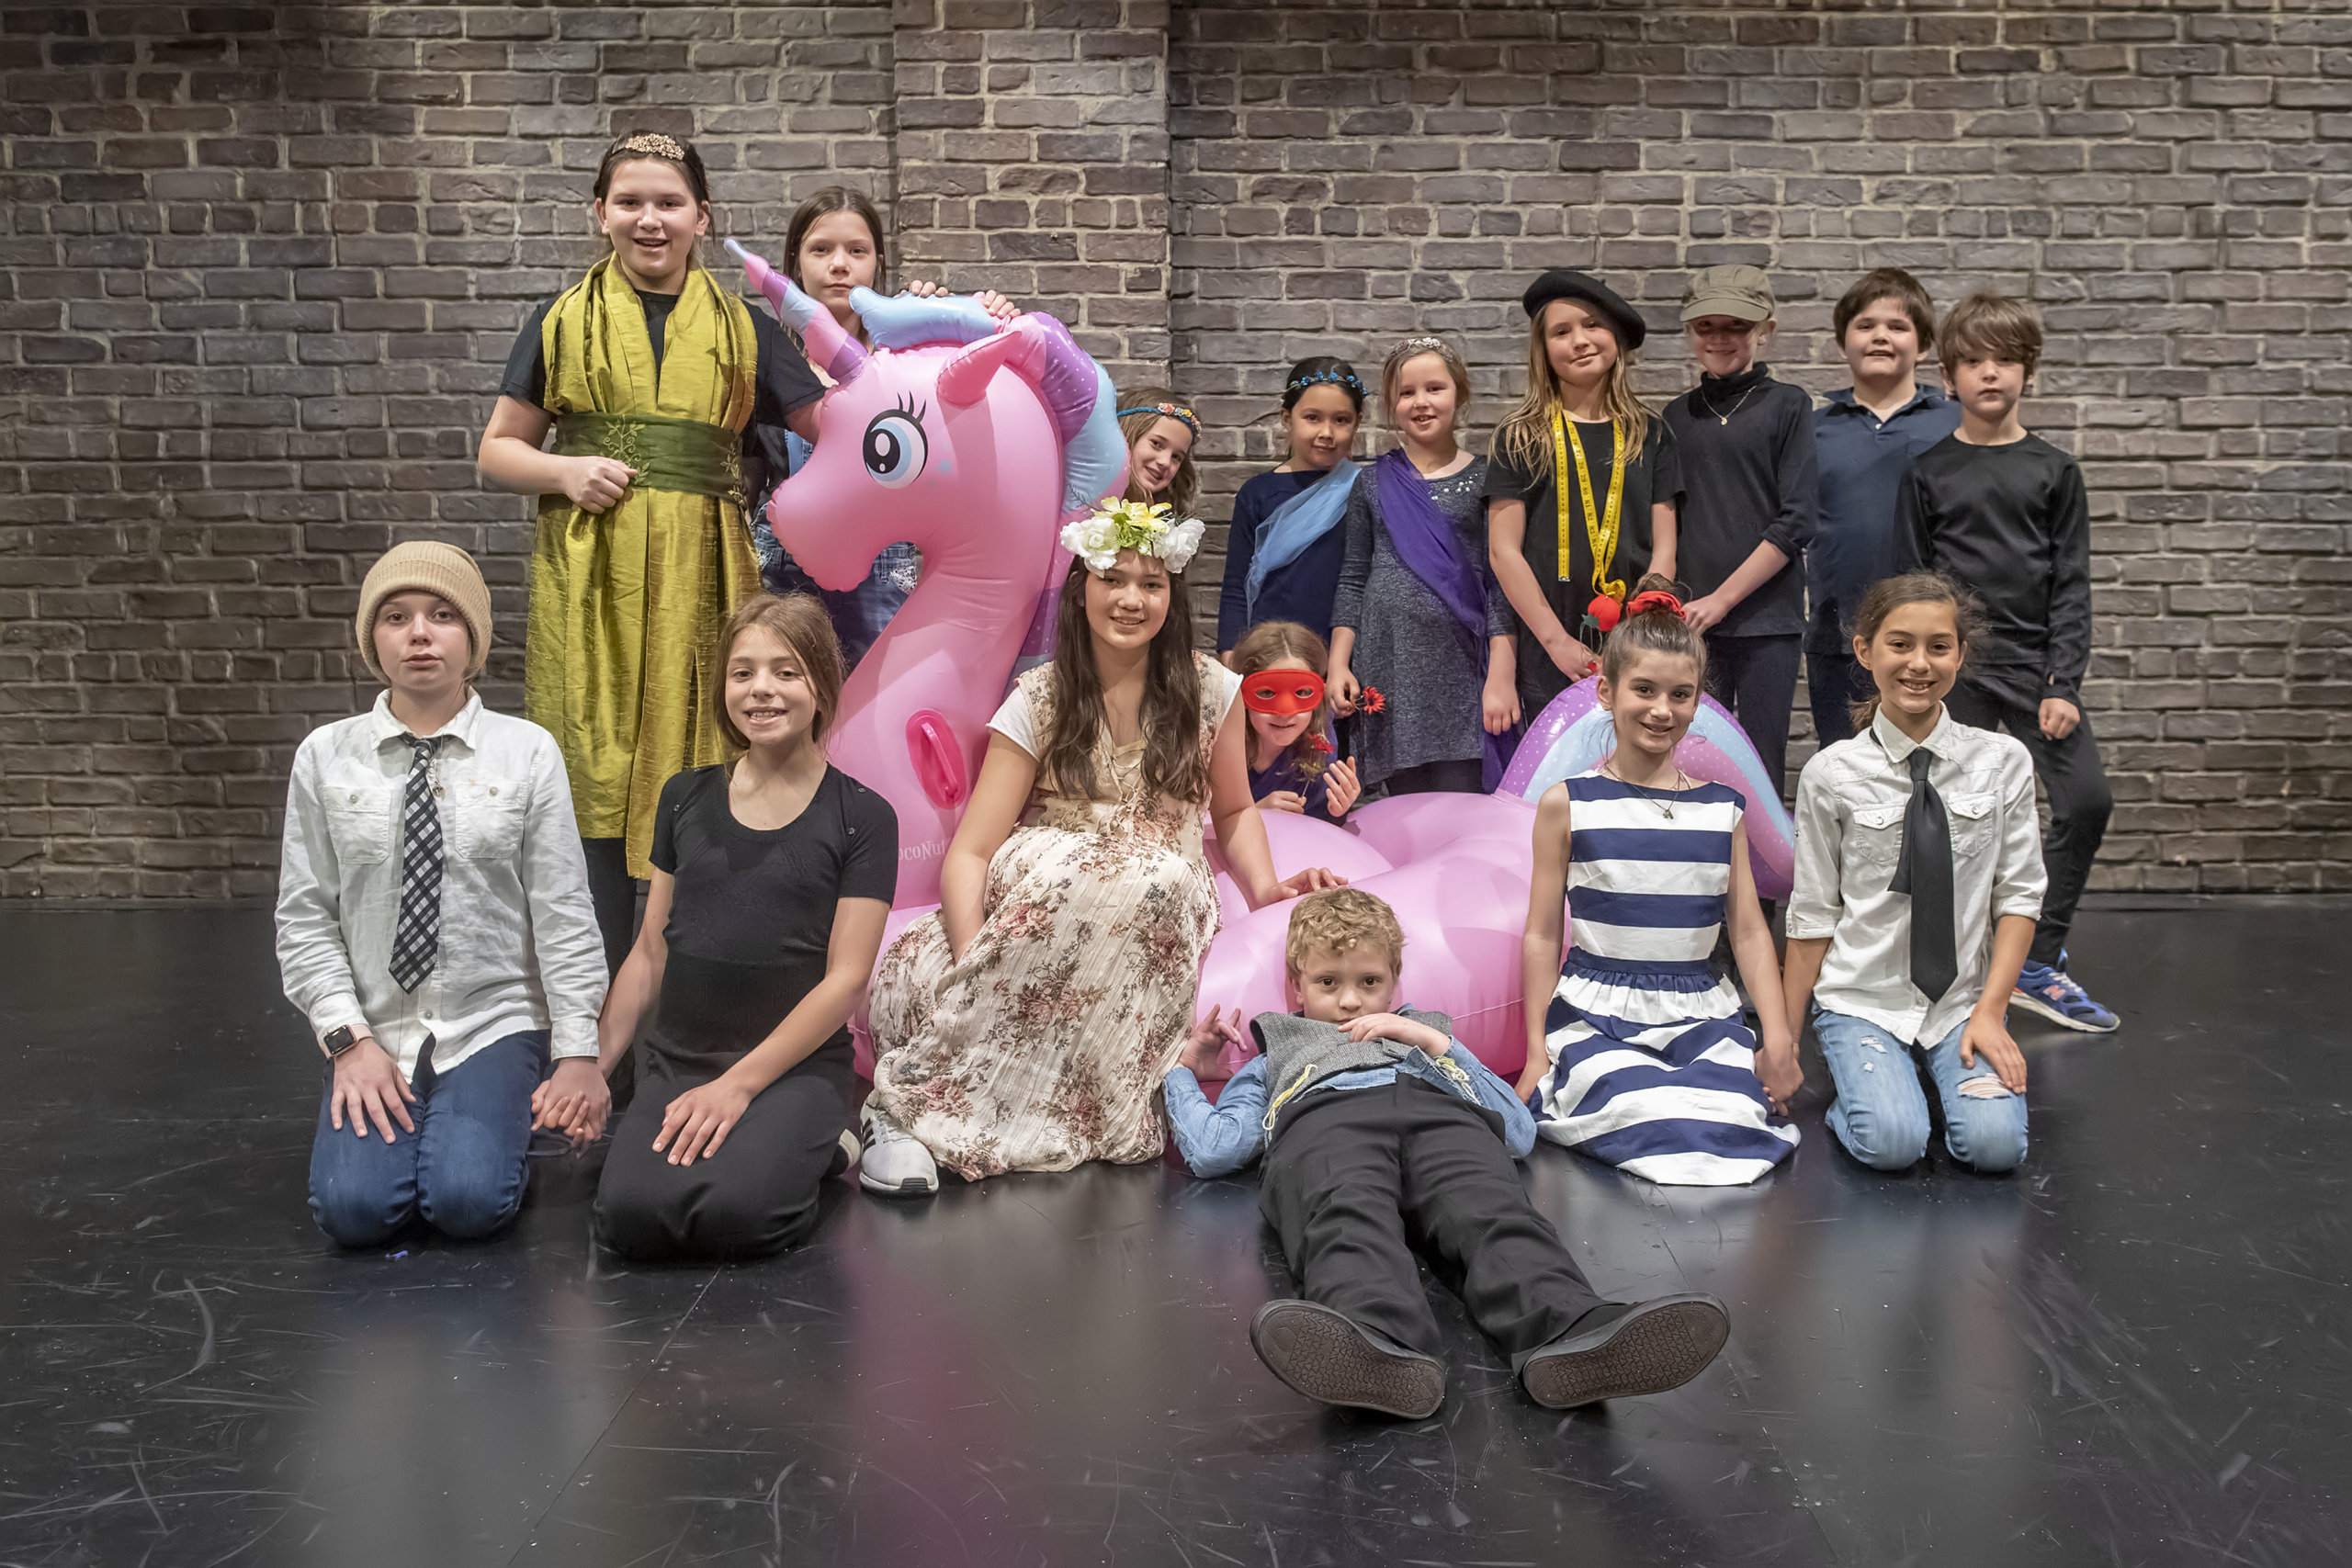 The Kids Theater Camp performance at the Bay Street Theater in Sag Harbor, New York on April 26, 2019